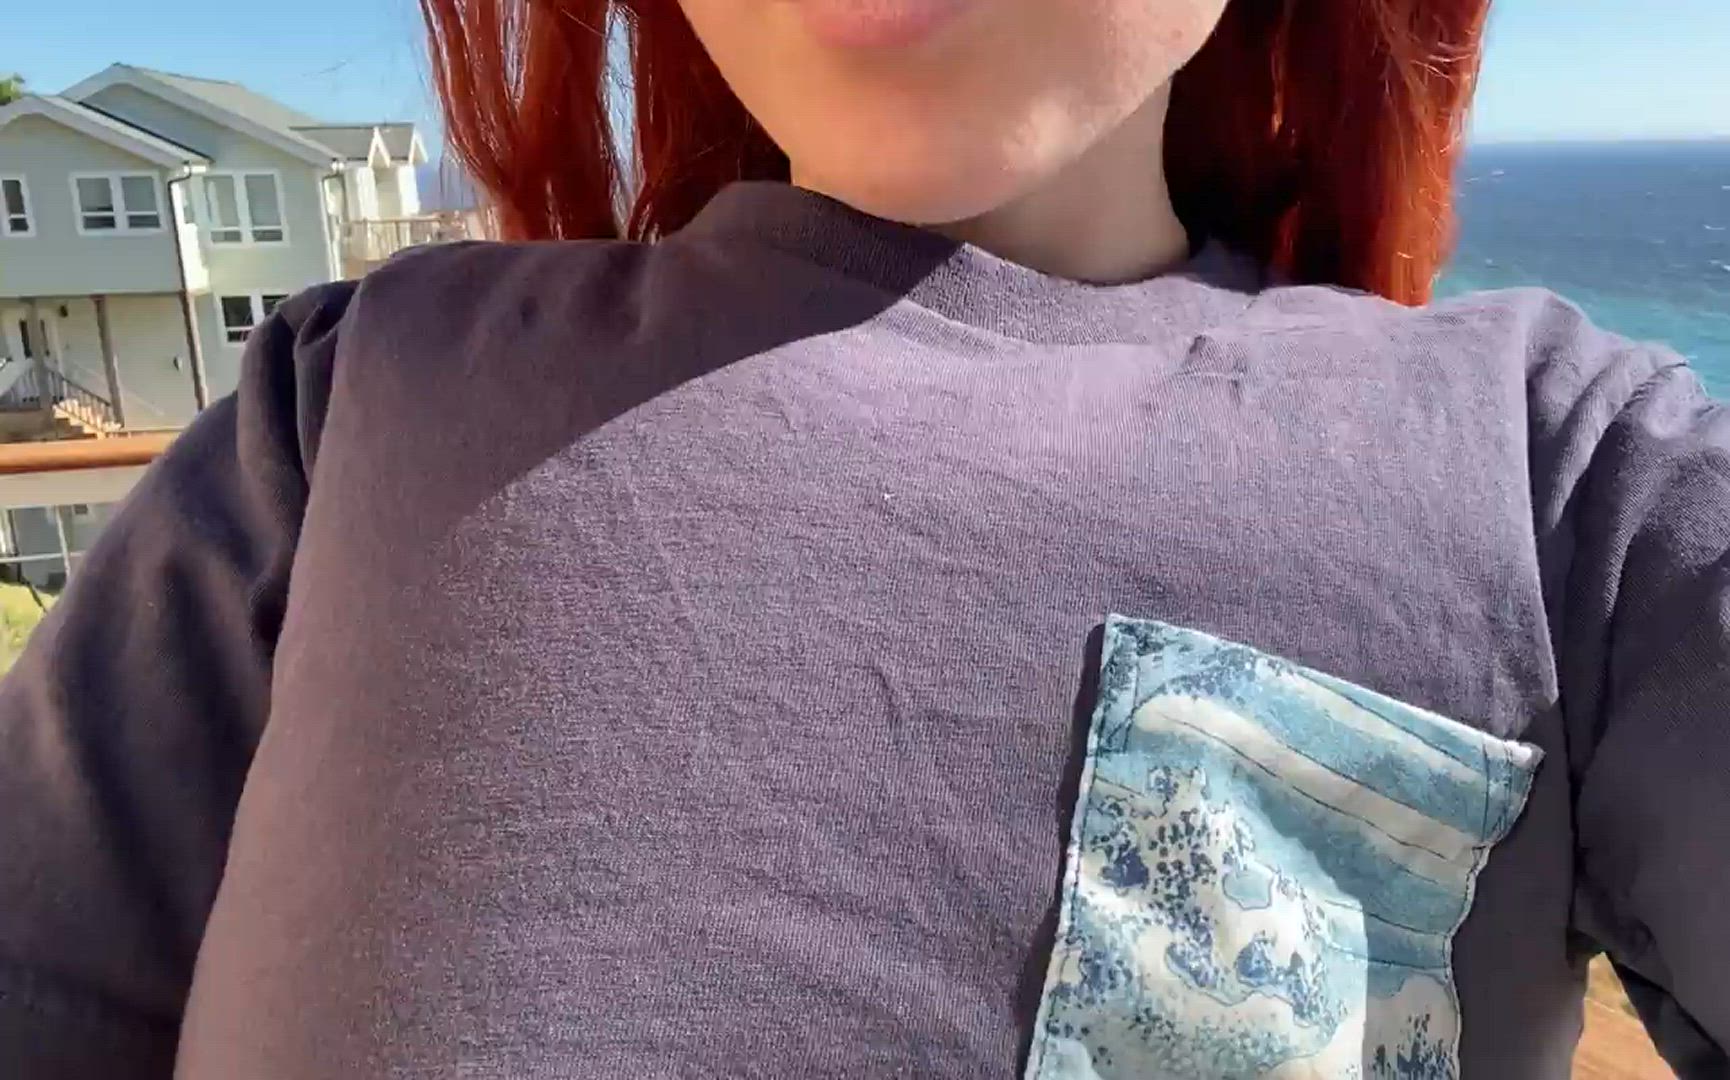 Tits porn video with onlyfans model daydreamredhead <strong>@daydreamredhead</strong>